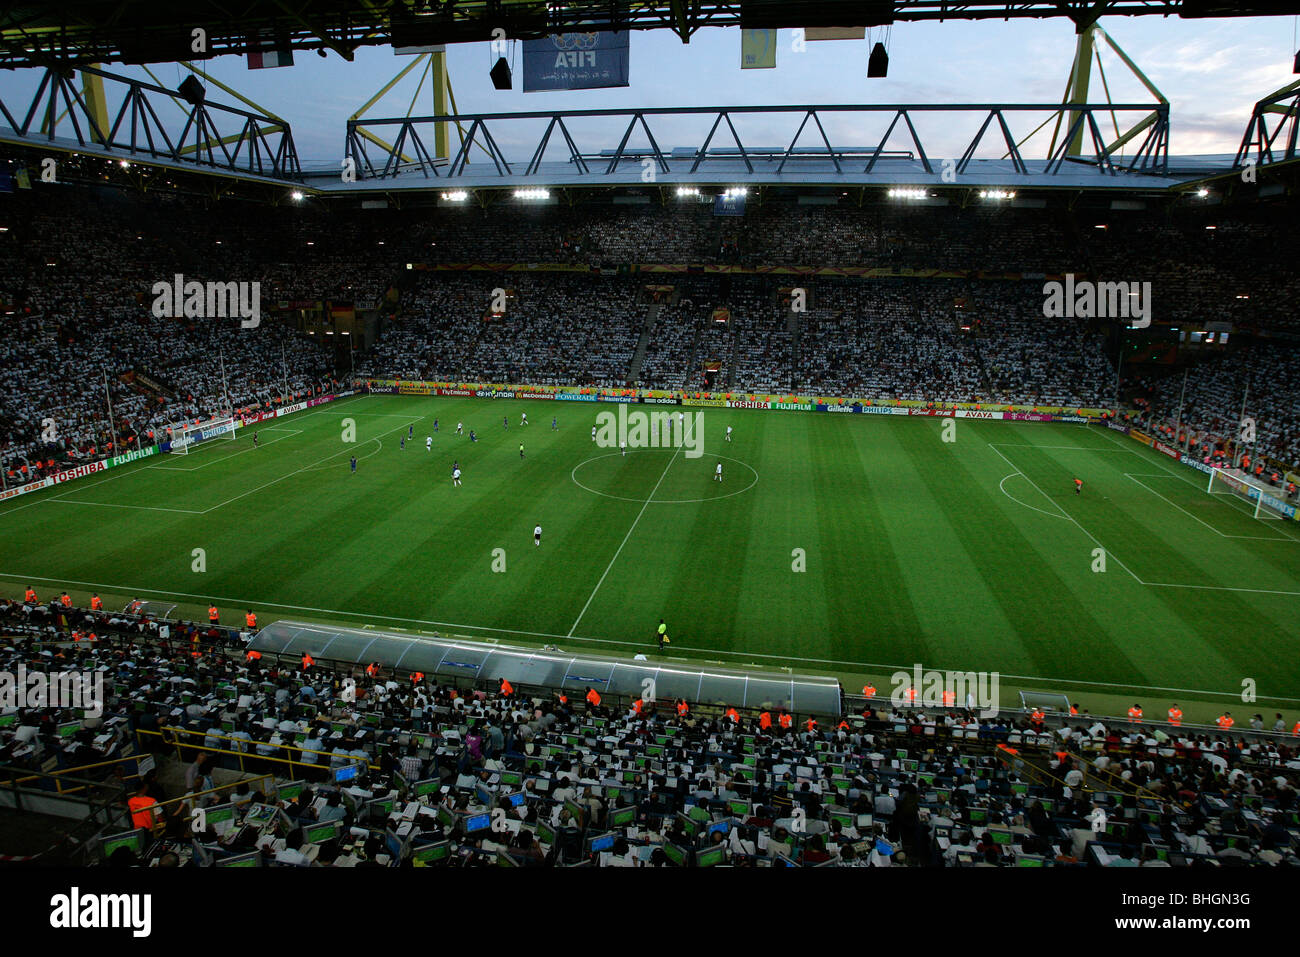 View inside the Westfalenstadion or Signal Iduna Park, Dortmund, Germany during a match at the 2006 World Cup Finals Stock Photo